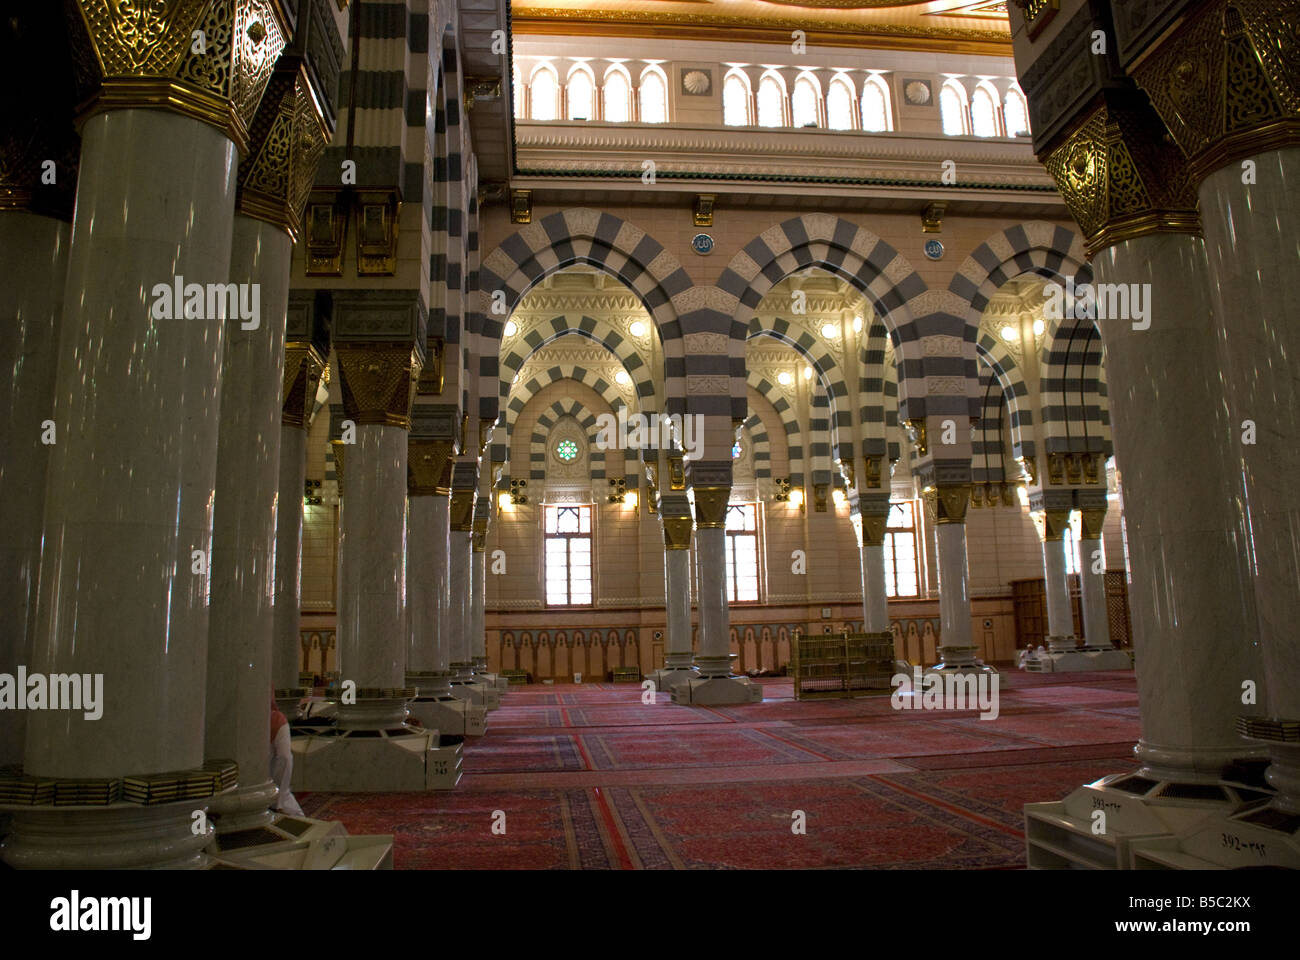 The Interior Of One Of The Extensions Of Masjid Al Nabawi In